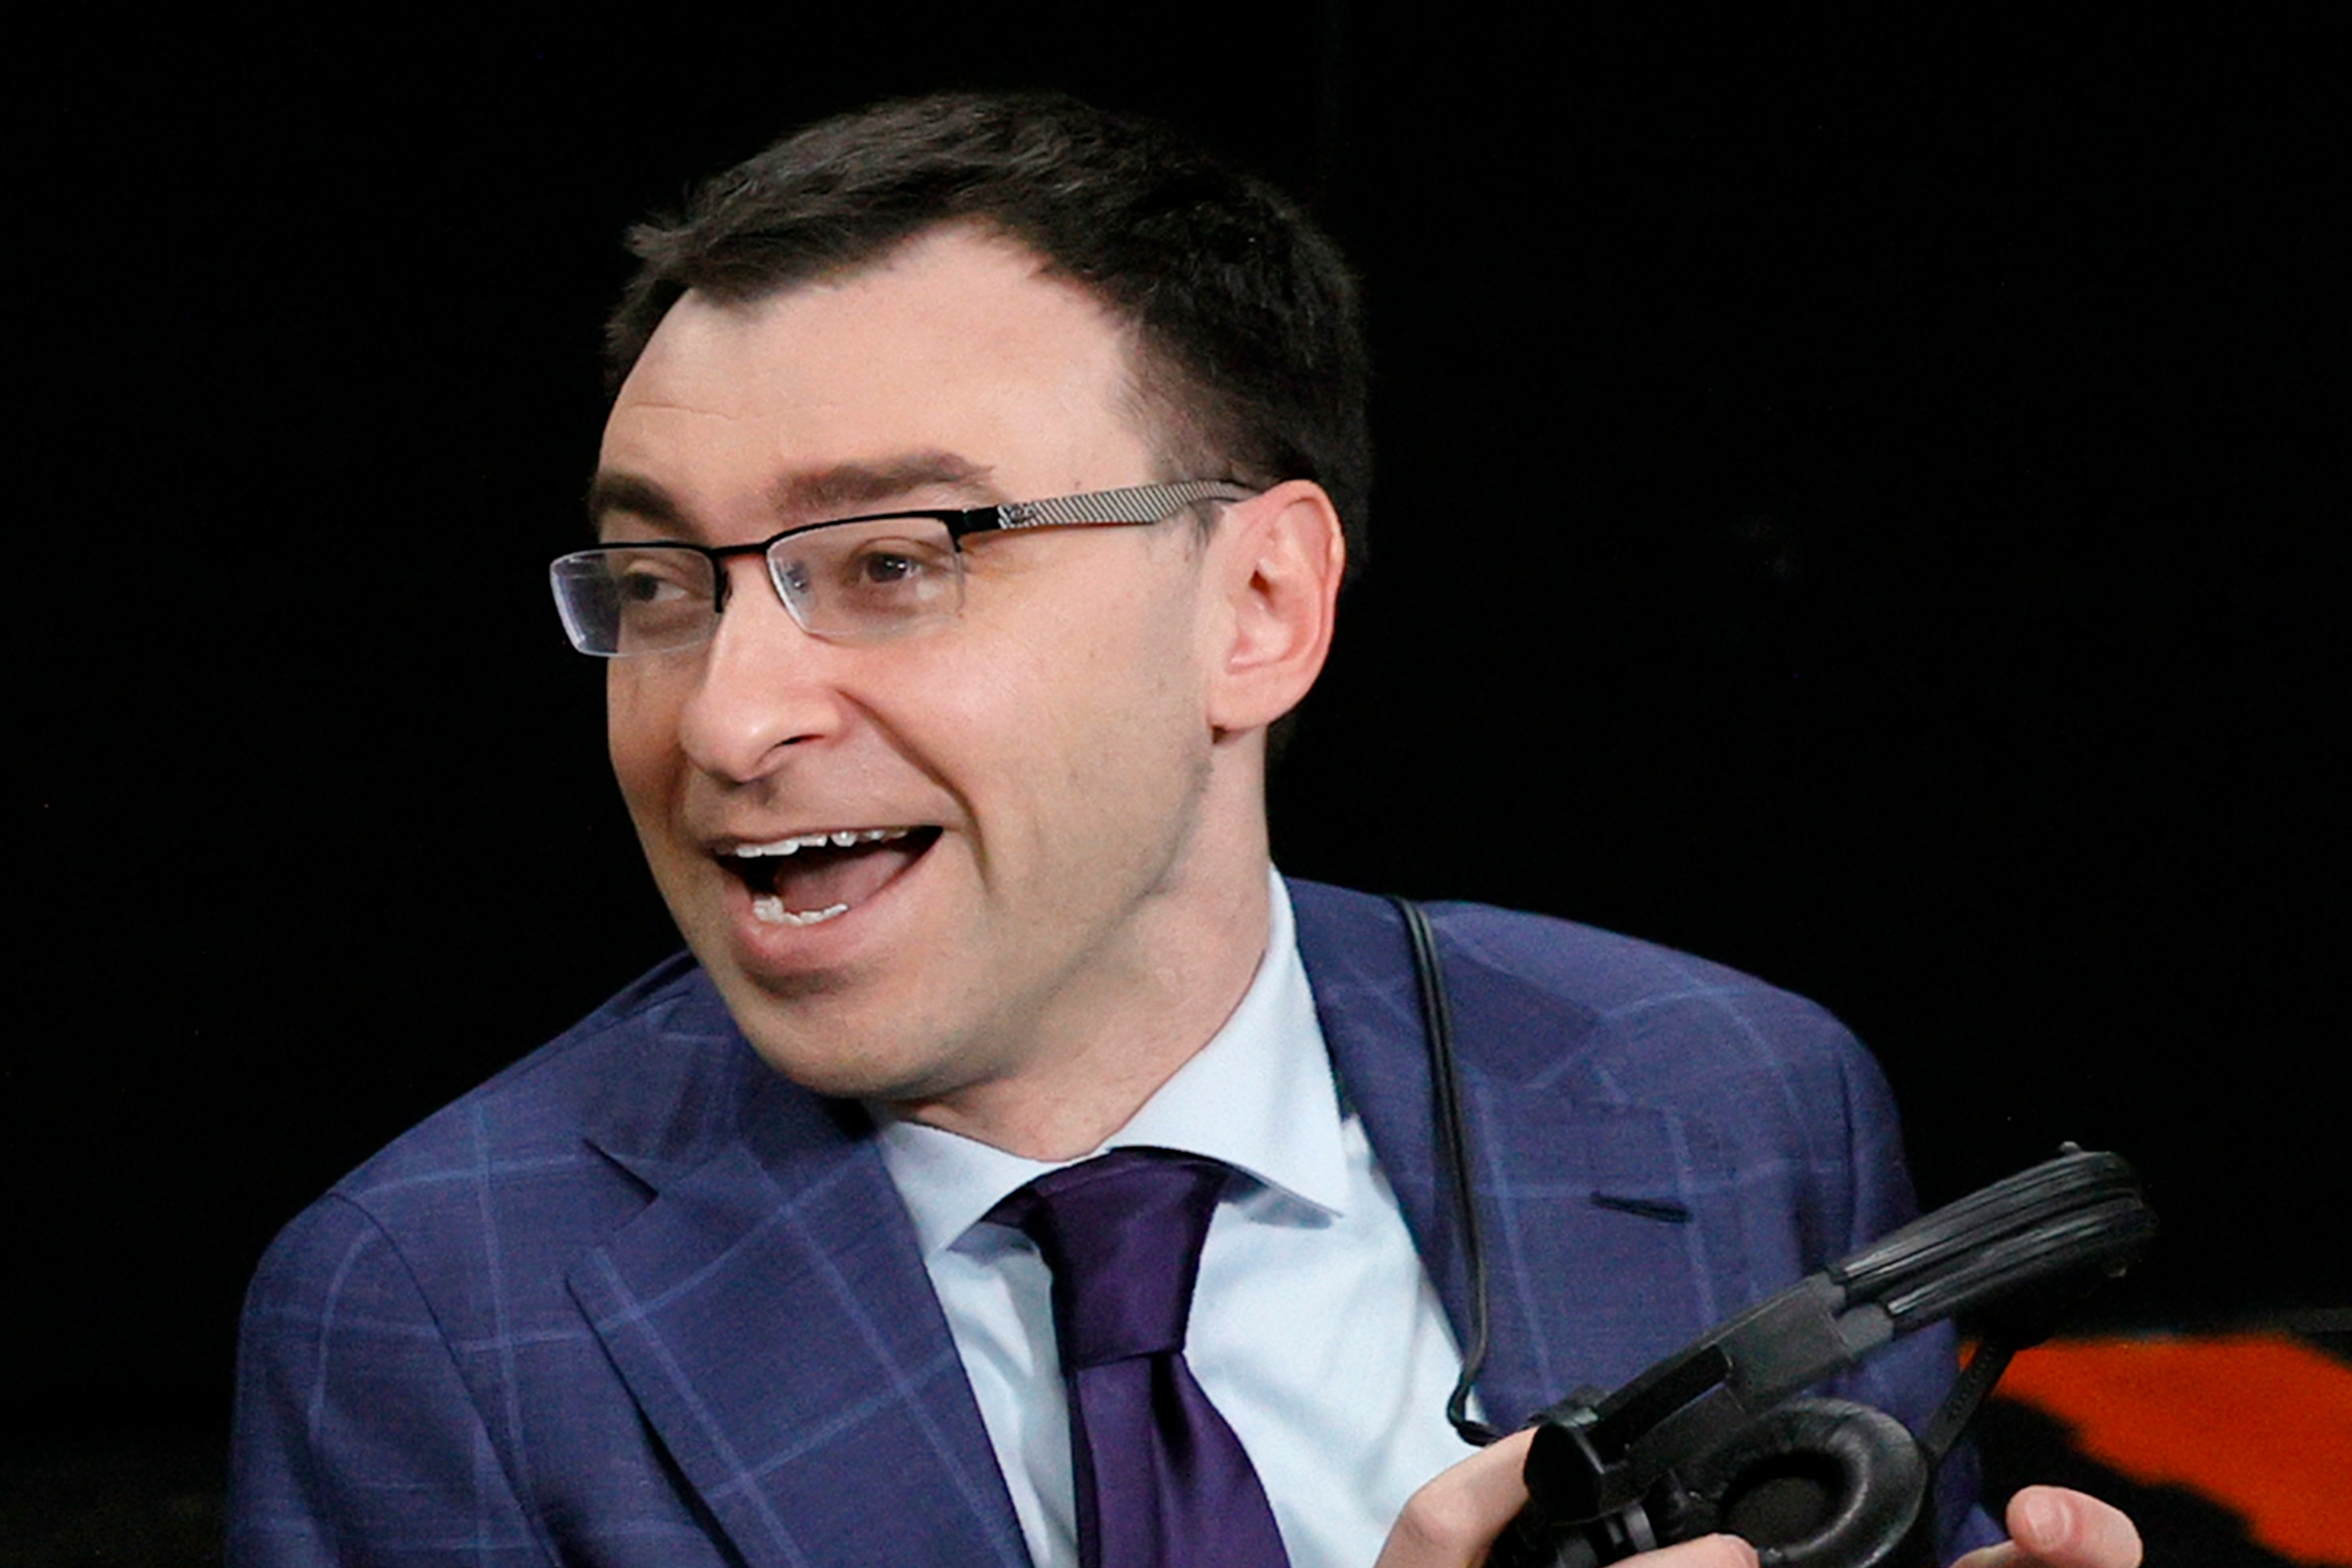 Jason Benetti on returning to White Sox booth: 'I love this job so